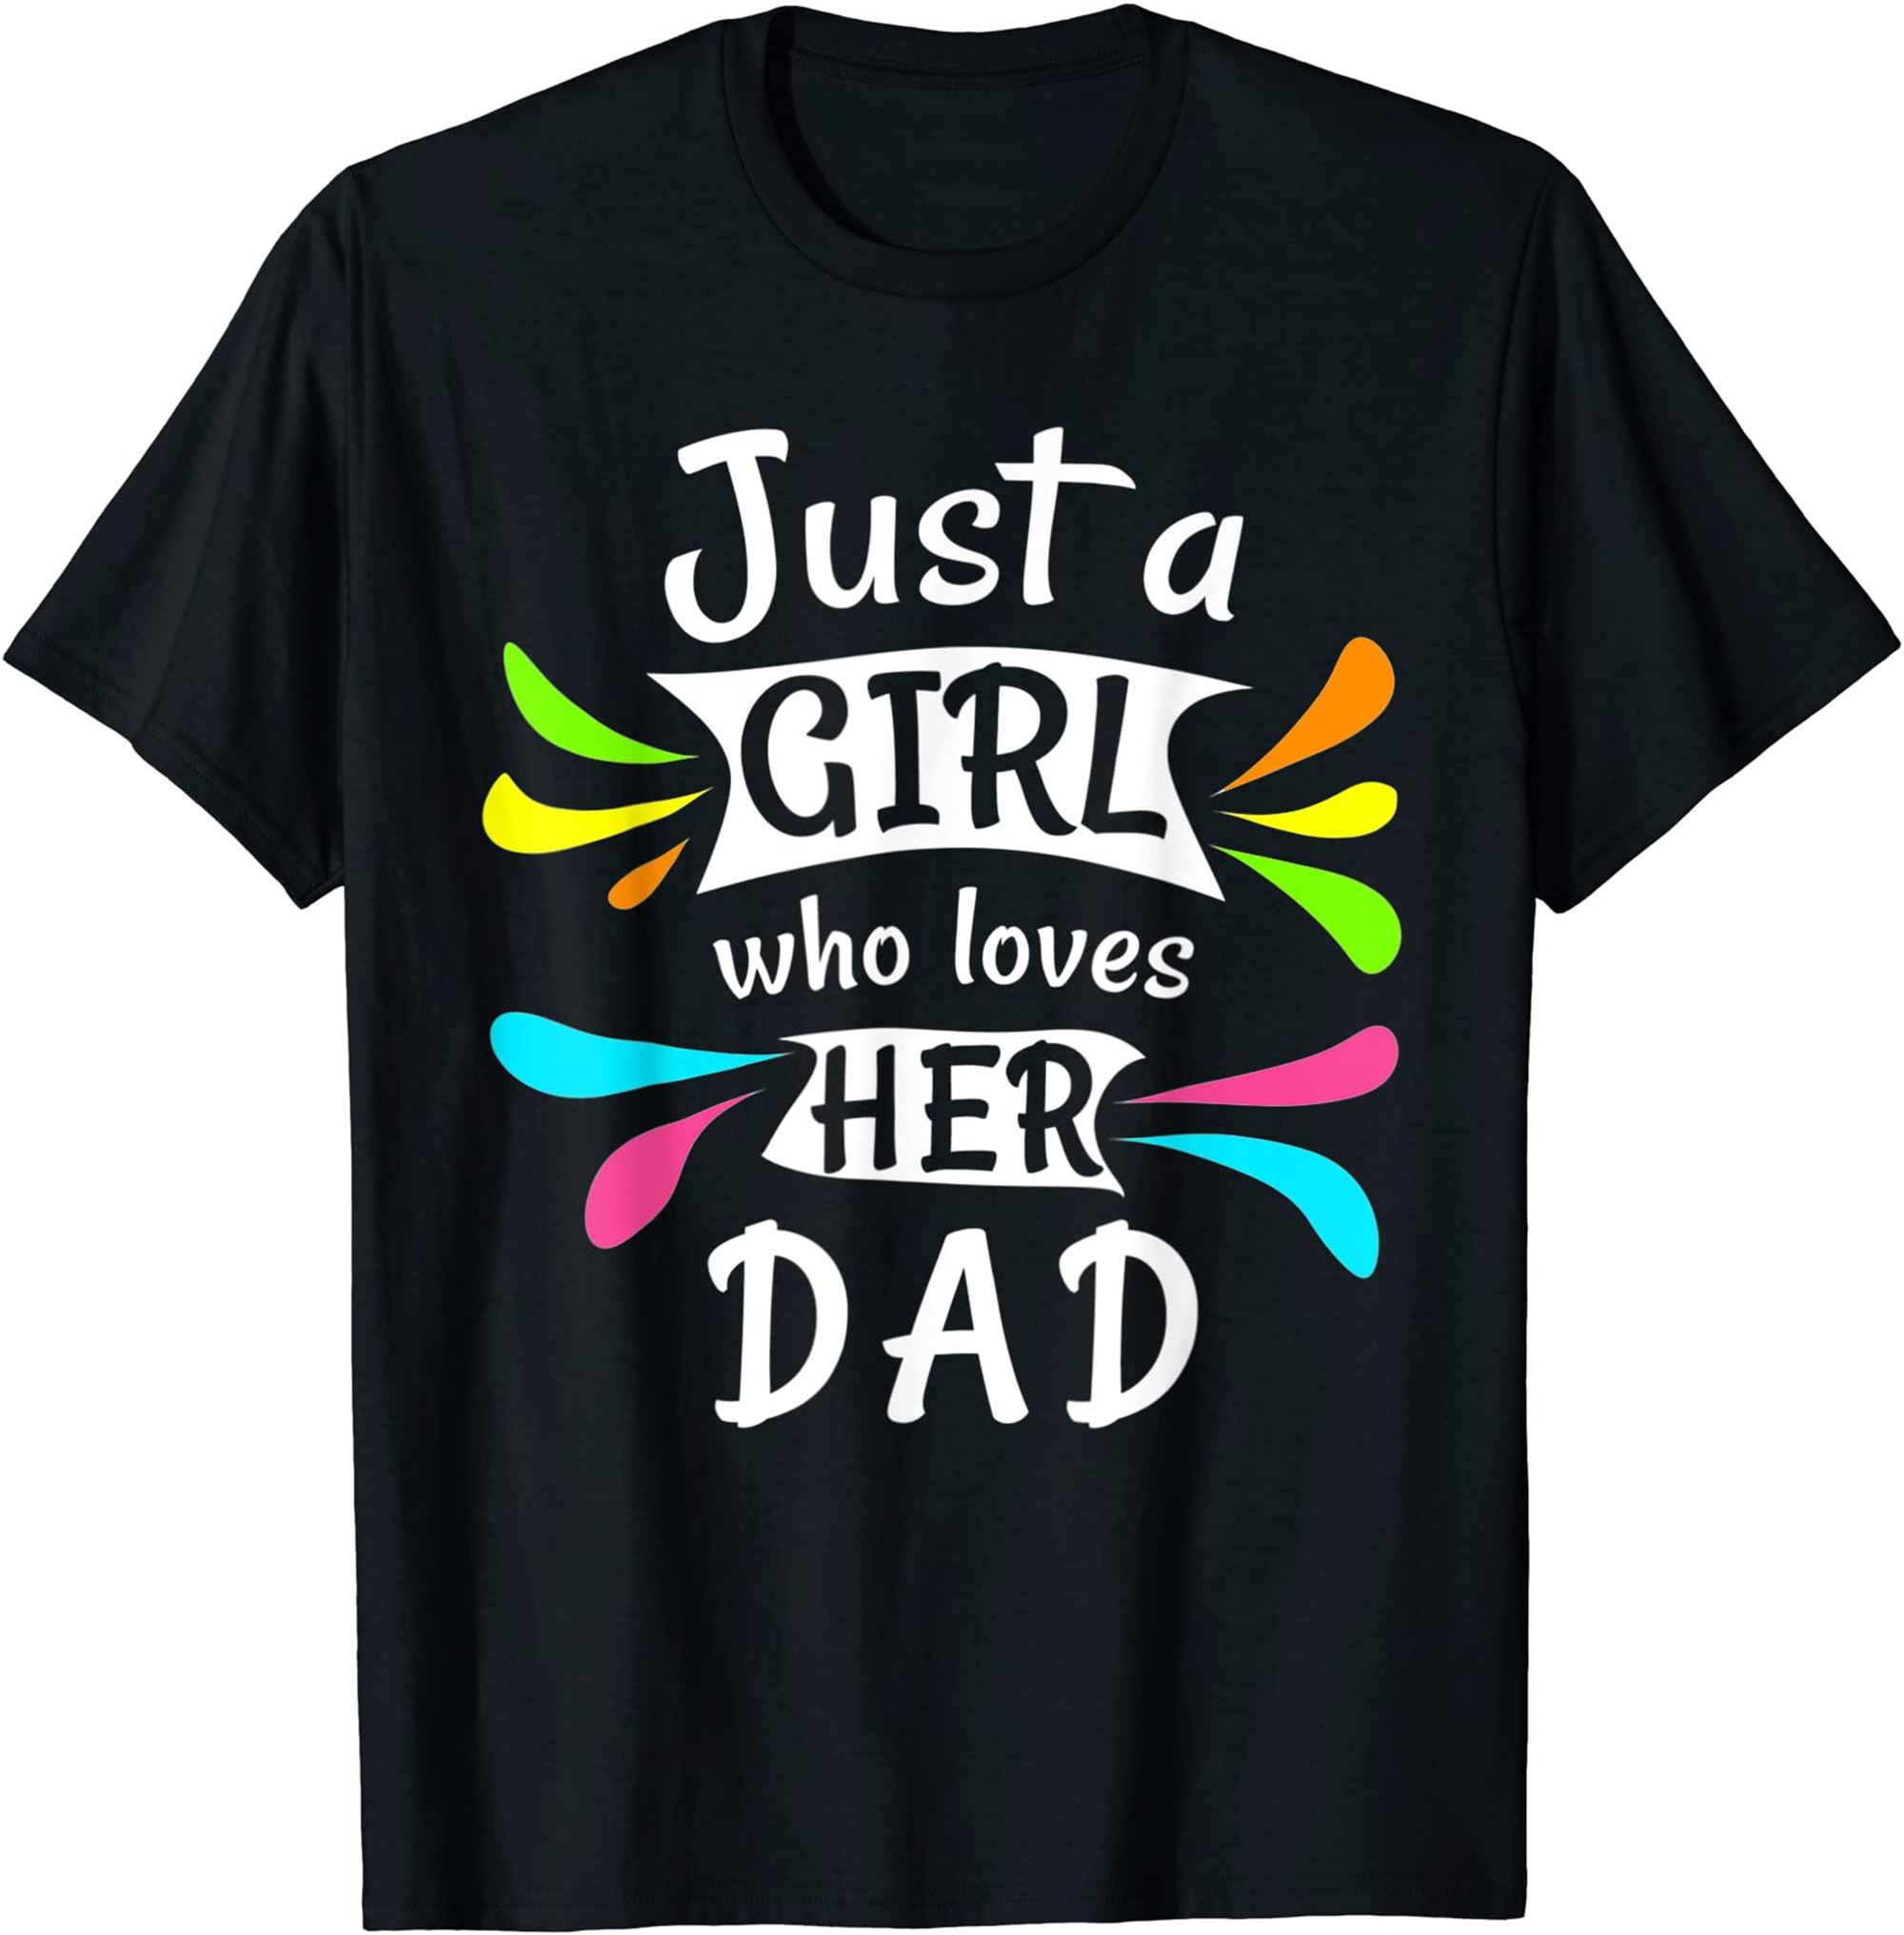 Just A Girl Who Loves Her Dad Cute Daddys Little Girl T-shirt Full Size Up To 5xl